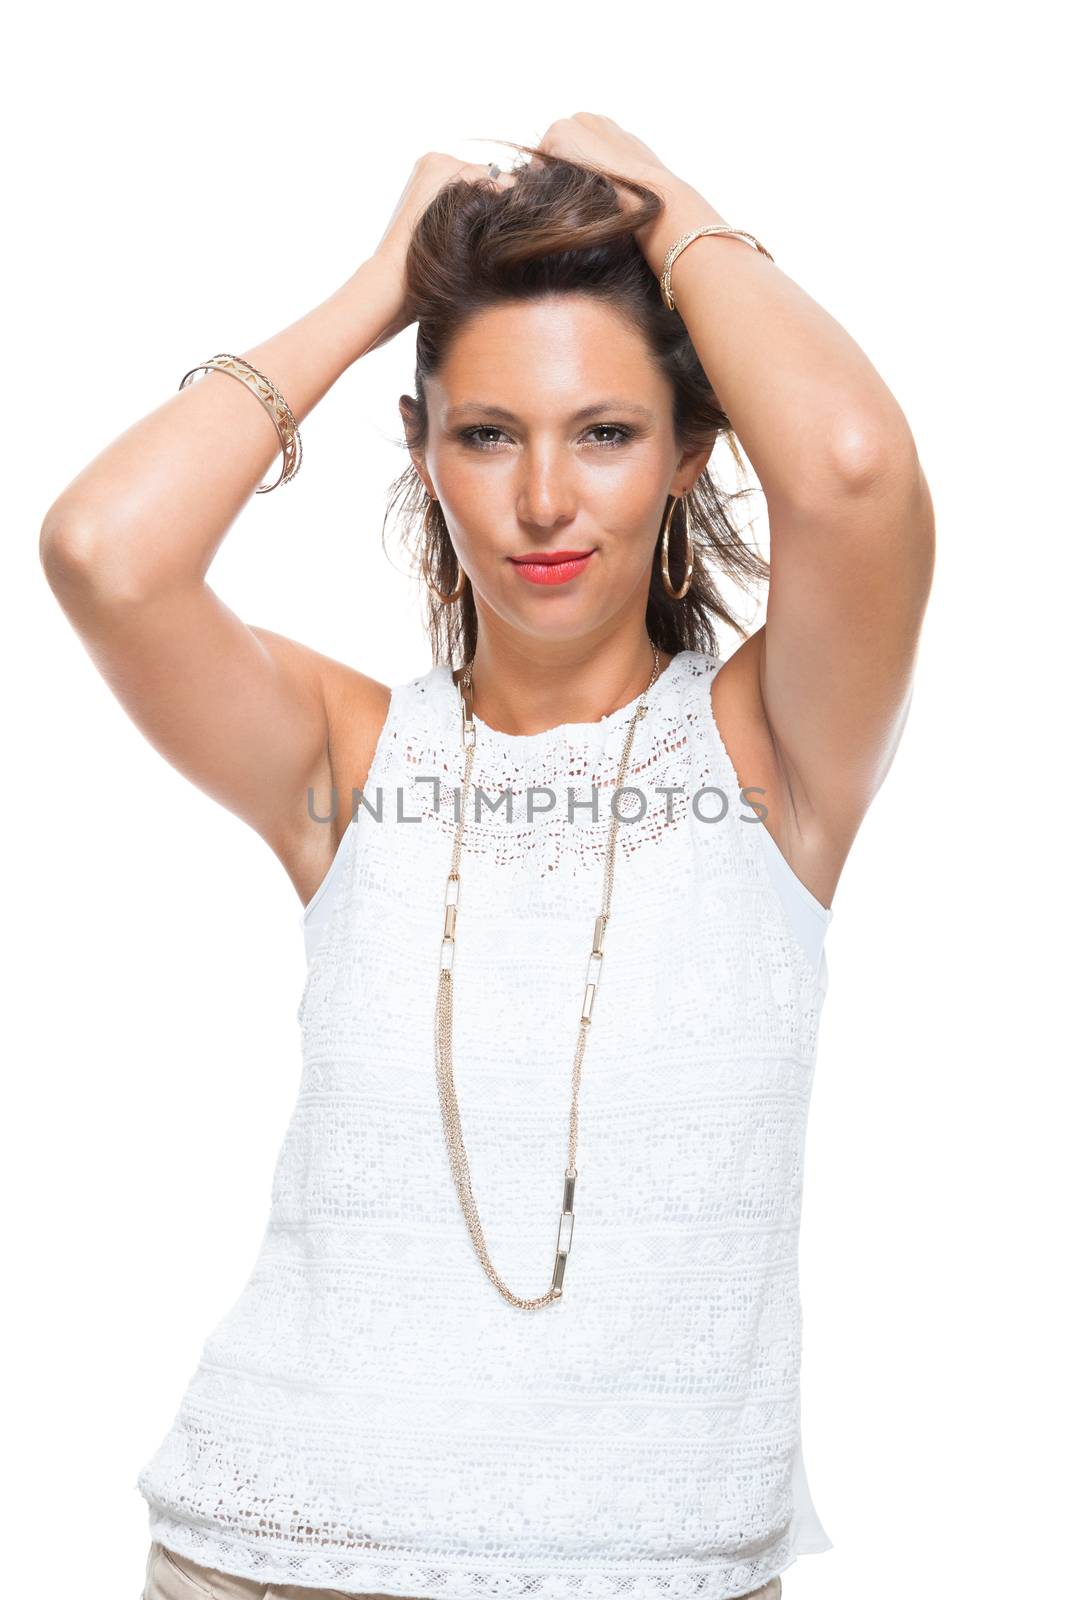 Half Body Shot of a Smiling Attractive Woman in Trendy Outfit, Holding her Hair Up While Looking at the Camera. Isolated on White Background.